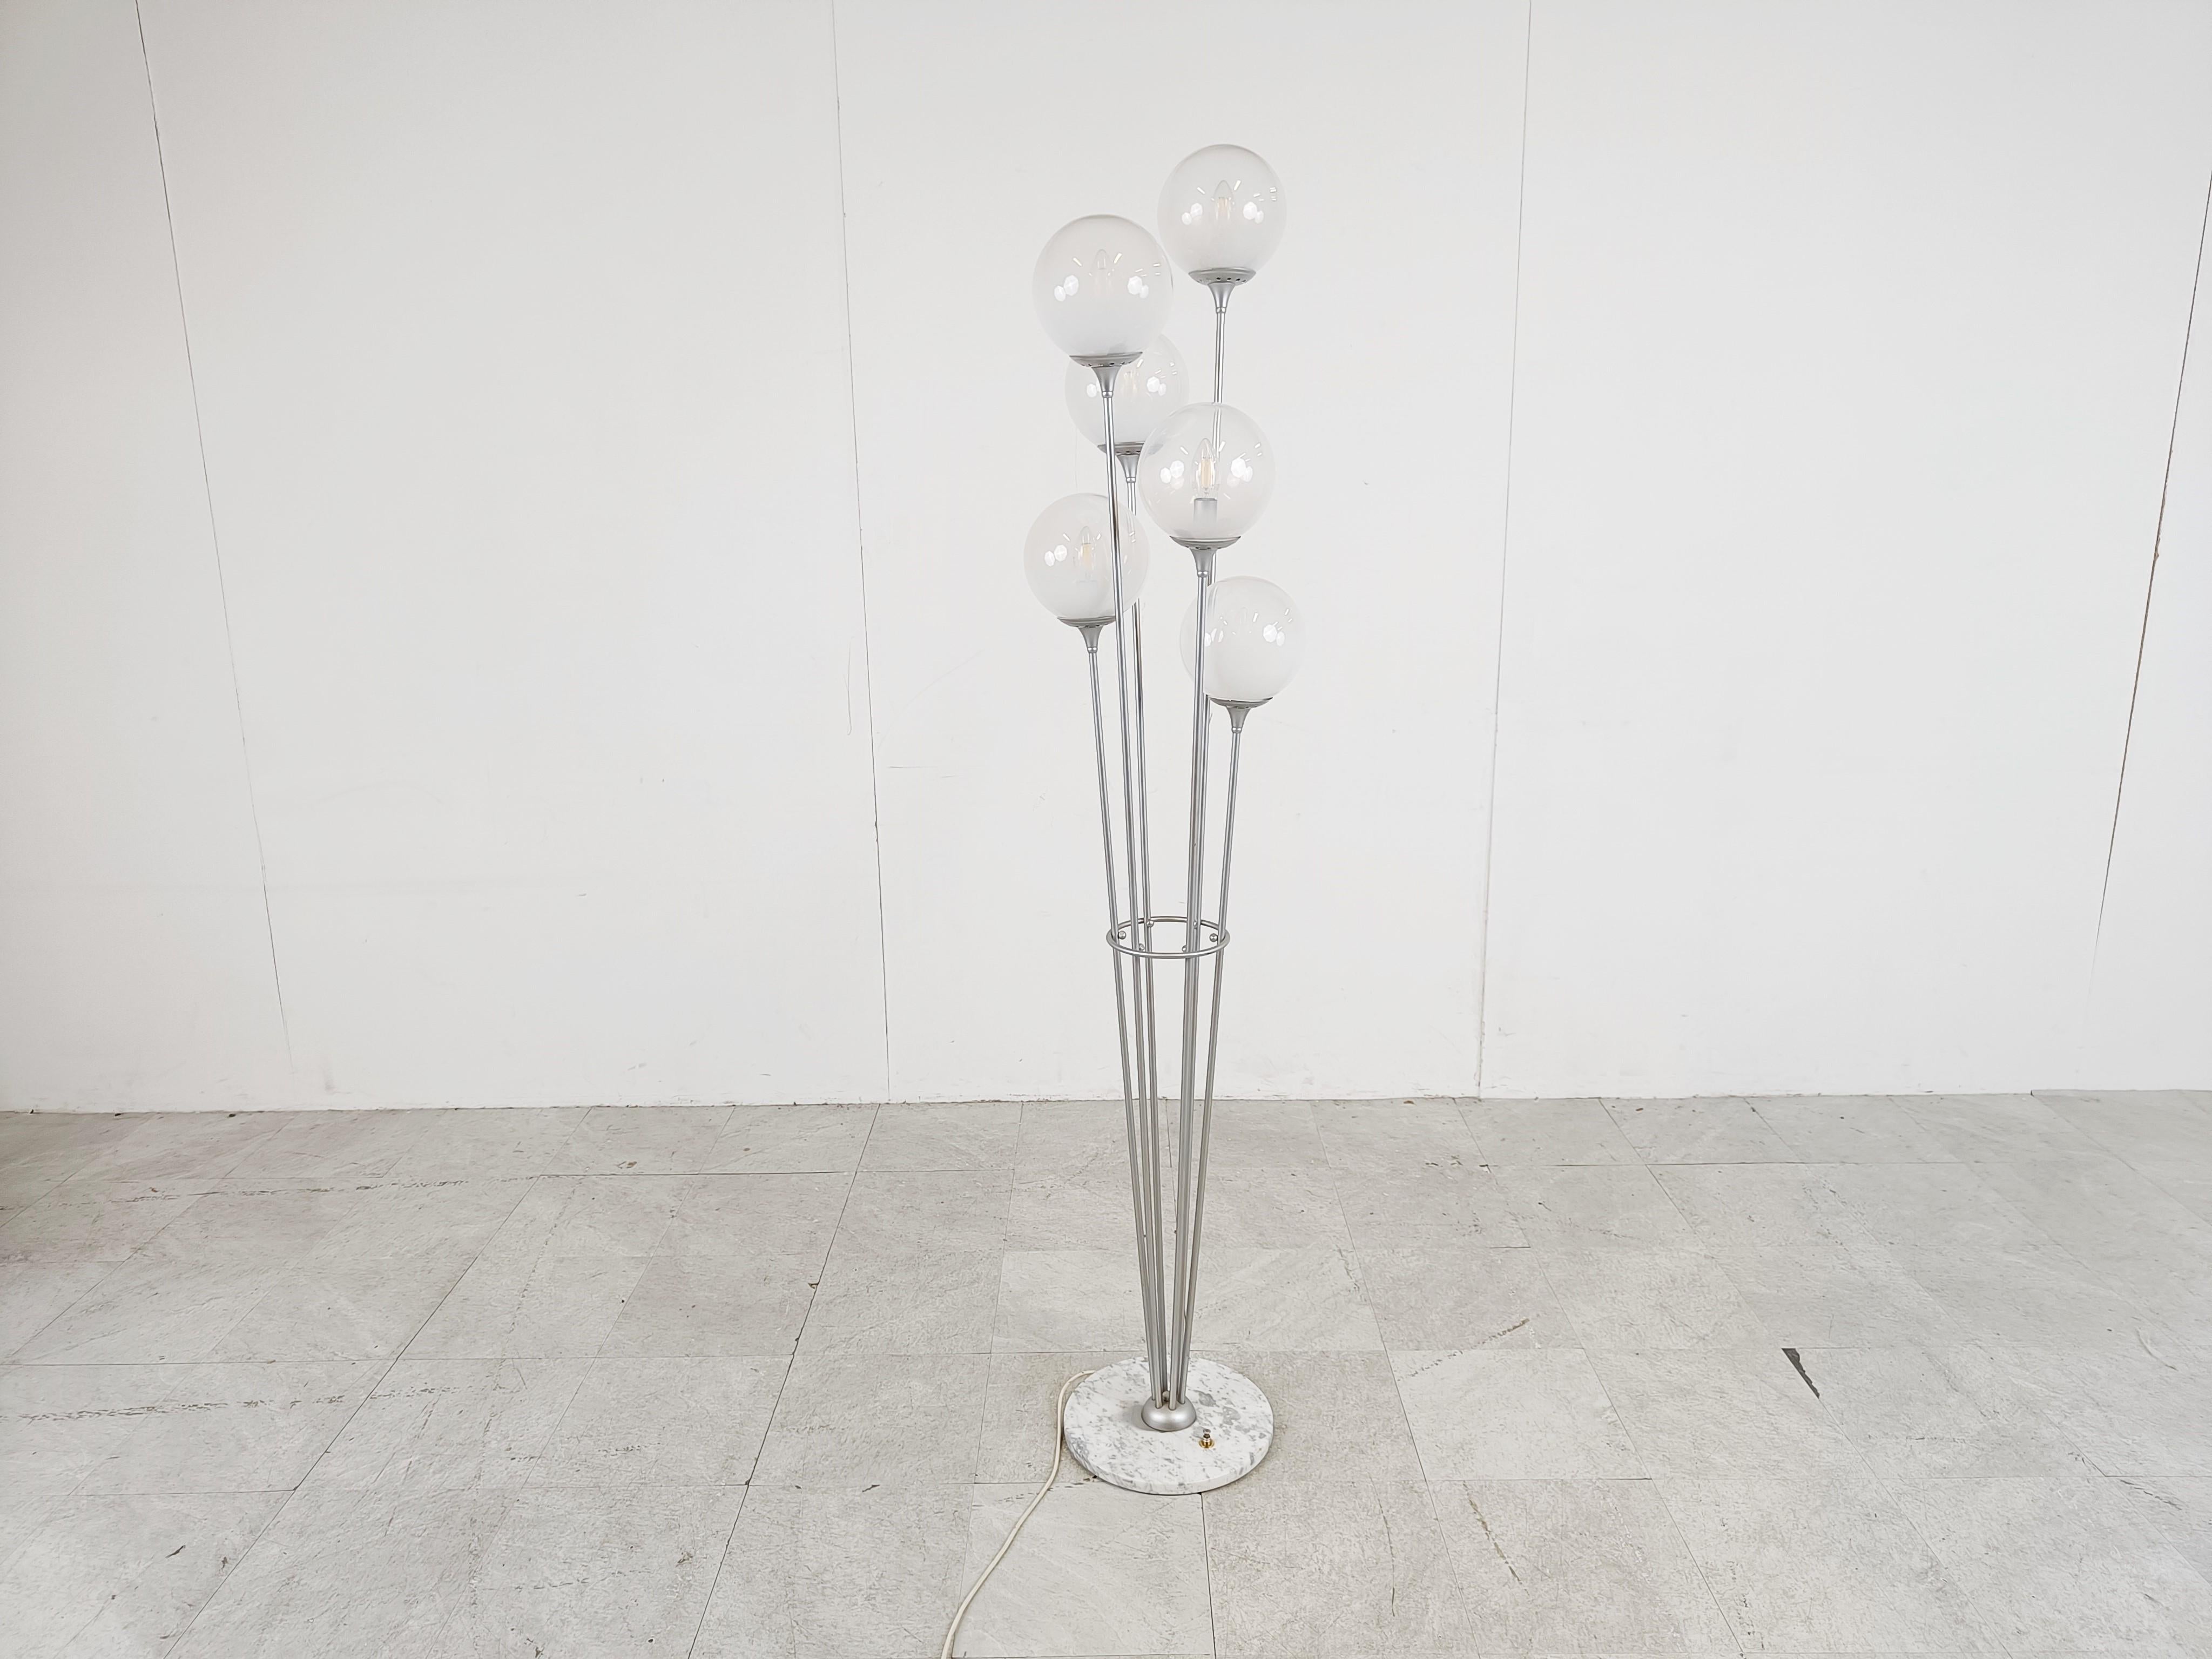 Mid-Century Modern floor lamp model 'Alberello' by Stilnovo italy.

The lamp has a carrara marble base, 6 metal arms each with semi transparent glass globes emitting a nice wam light.

The globes are on different height creating a nice